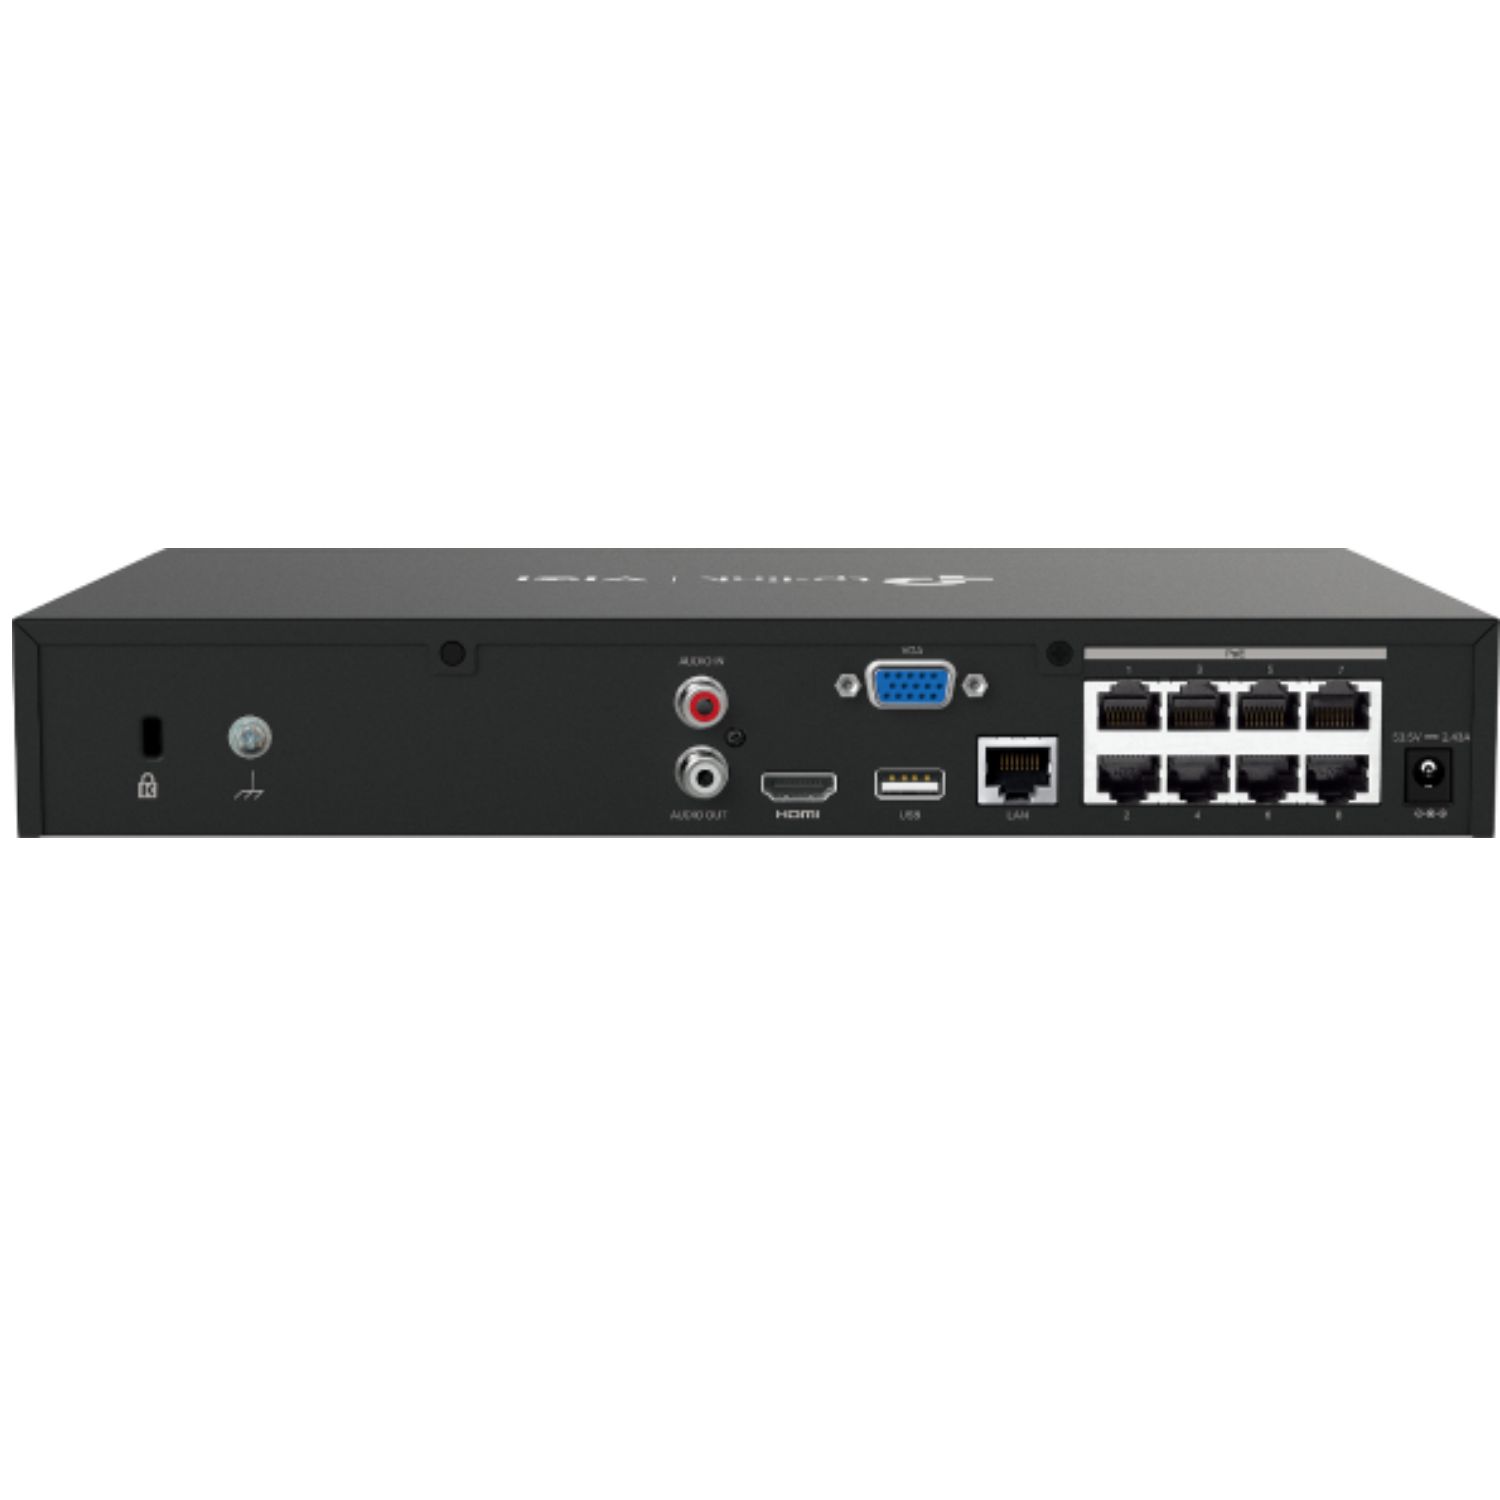 TP-Link VIGI NVR1008H-8MP 8 Channel PoE+ Network Video Recorder, 113W PoE Budget, H.265+, 4K Video Output  16MP Decoding Capacity (HDD Not Included)